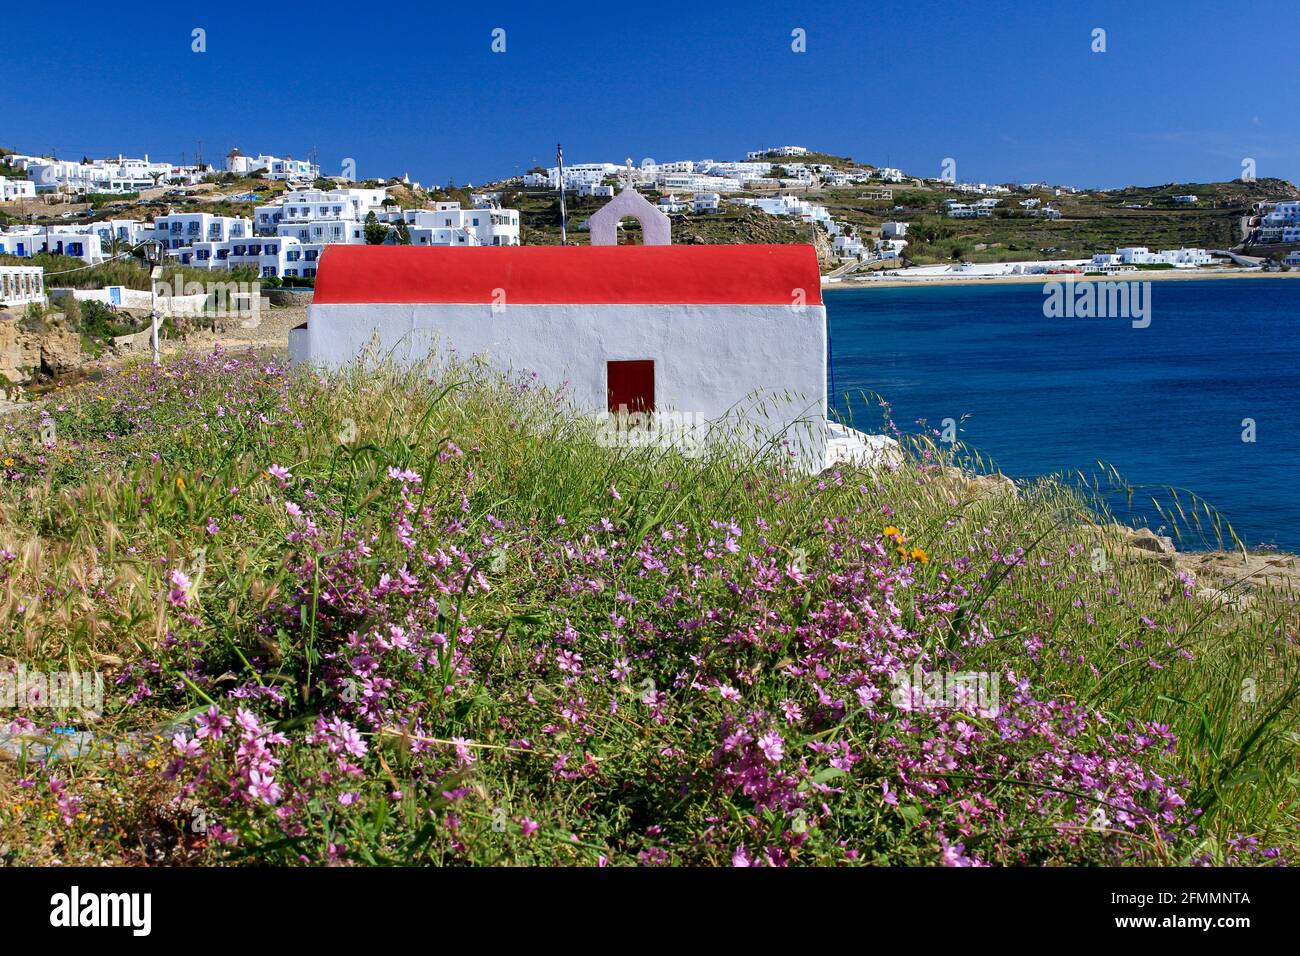 Small white church with red roof and wildflowers by sea, Mykonos, Greece Stock Photo